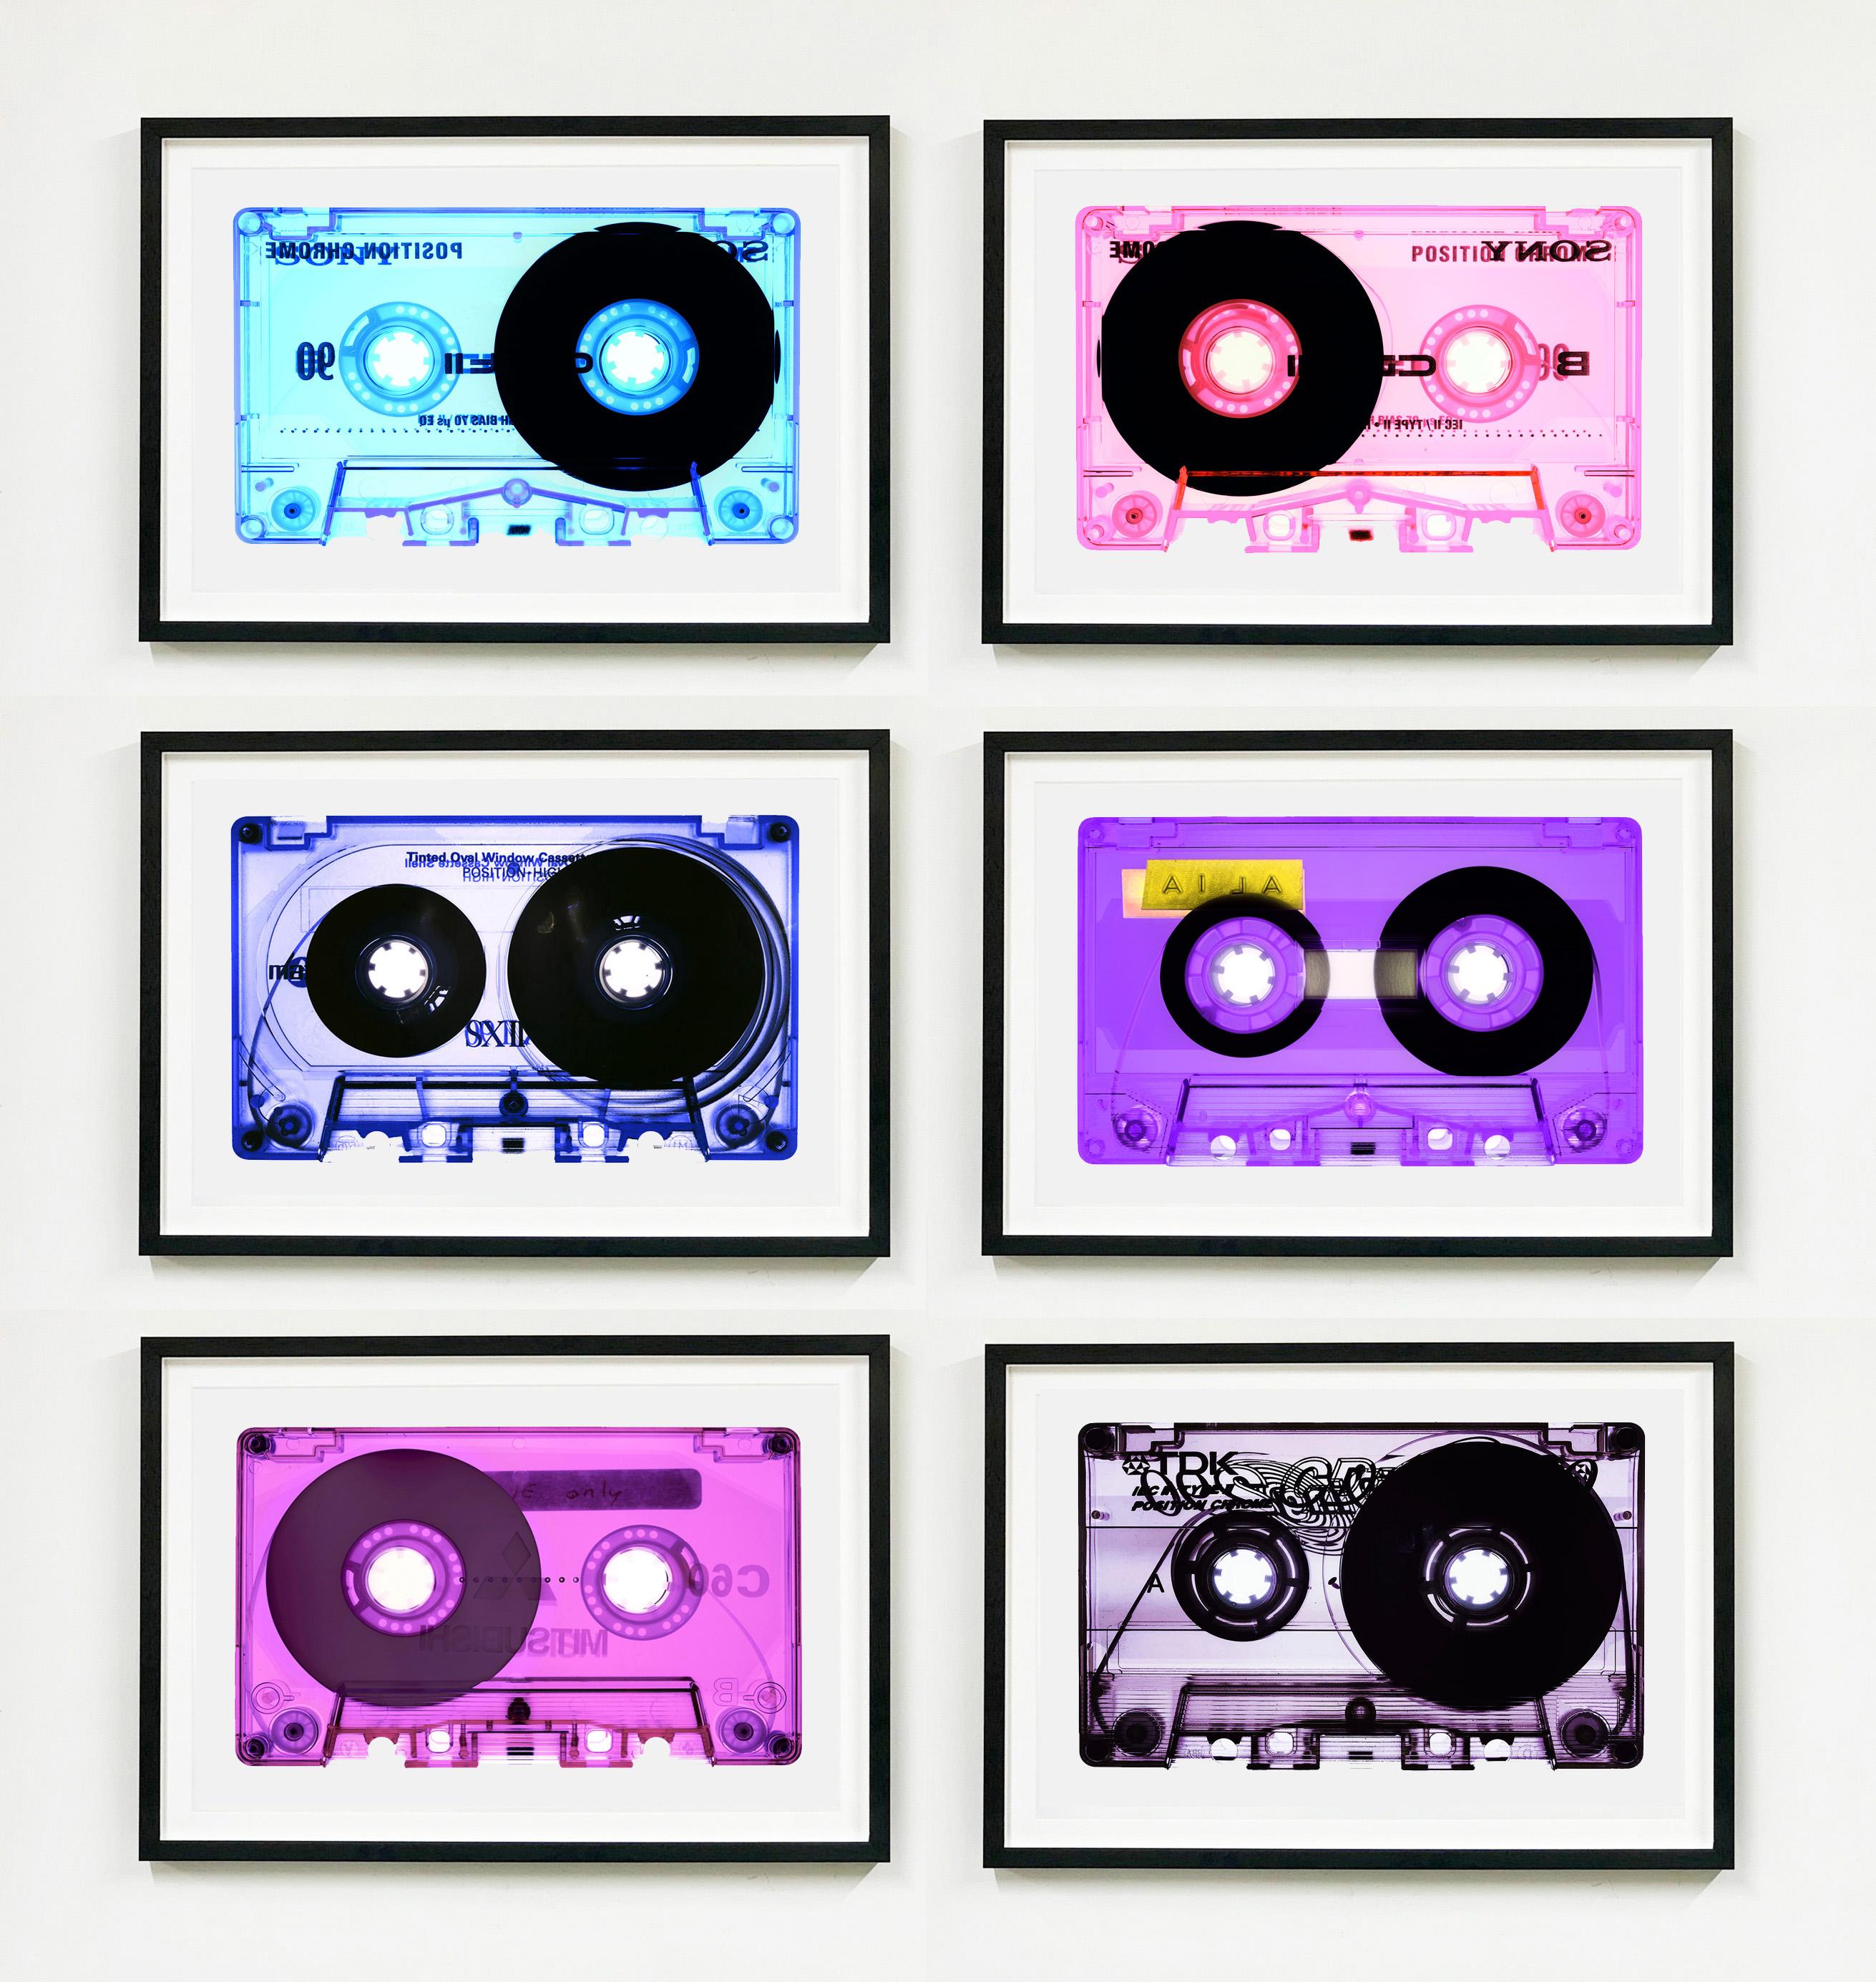 Tape Collection, AILA Lilac - Contemporary Pop Art Color Photography - Purple Print by Heidler & Heeps